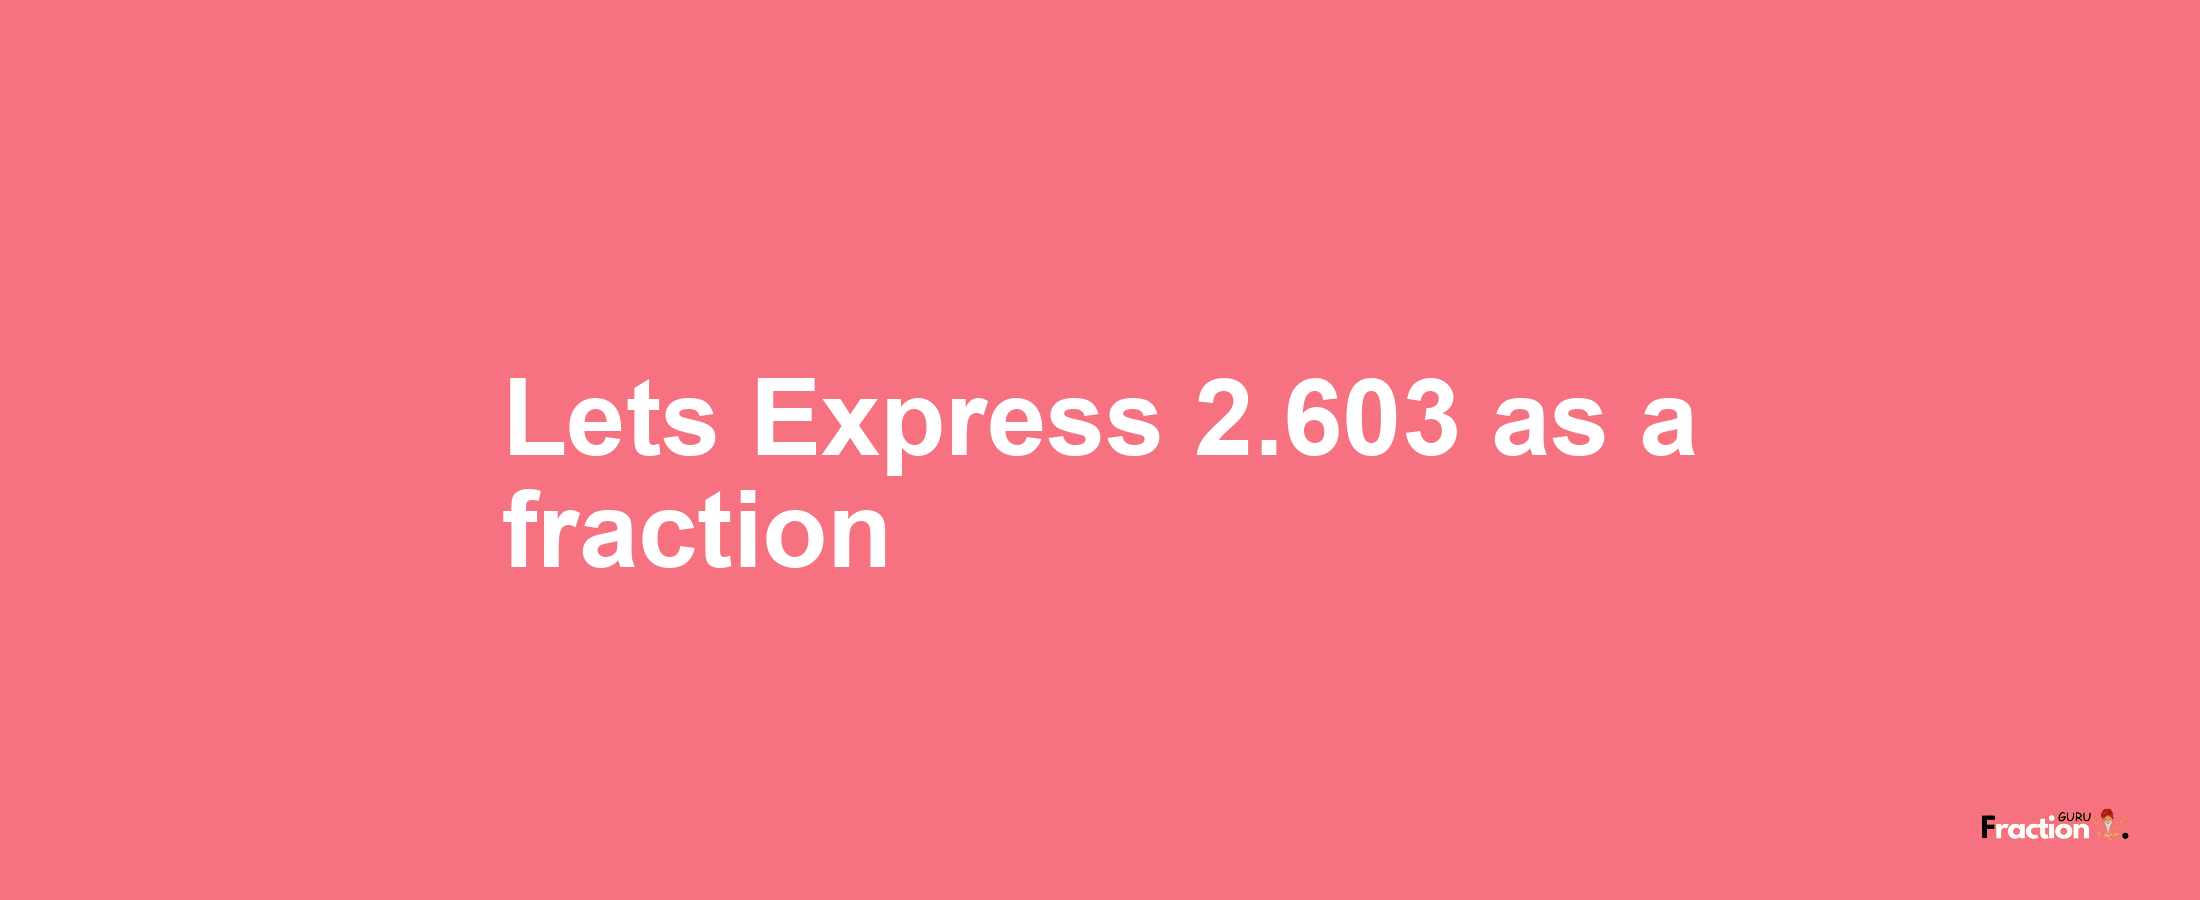 Lets Express 2.603 as afraction